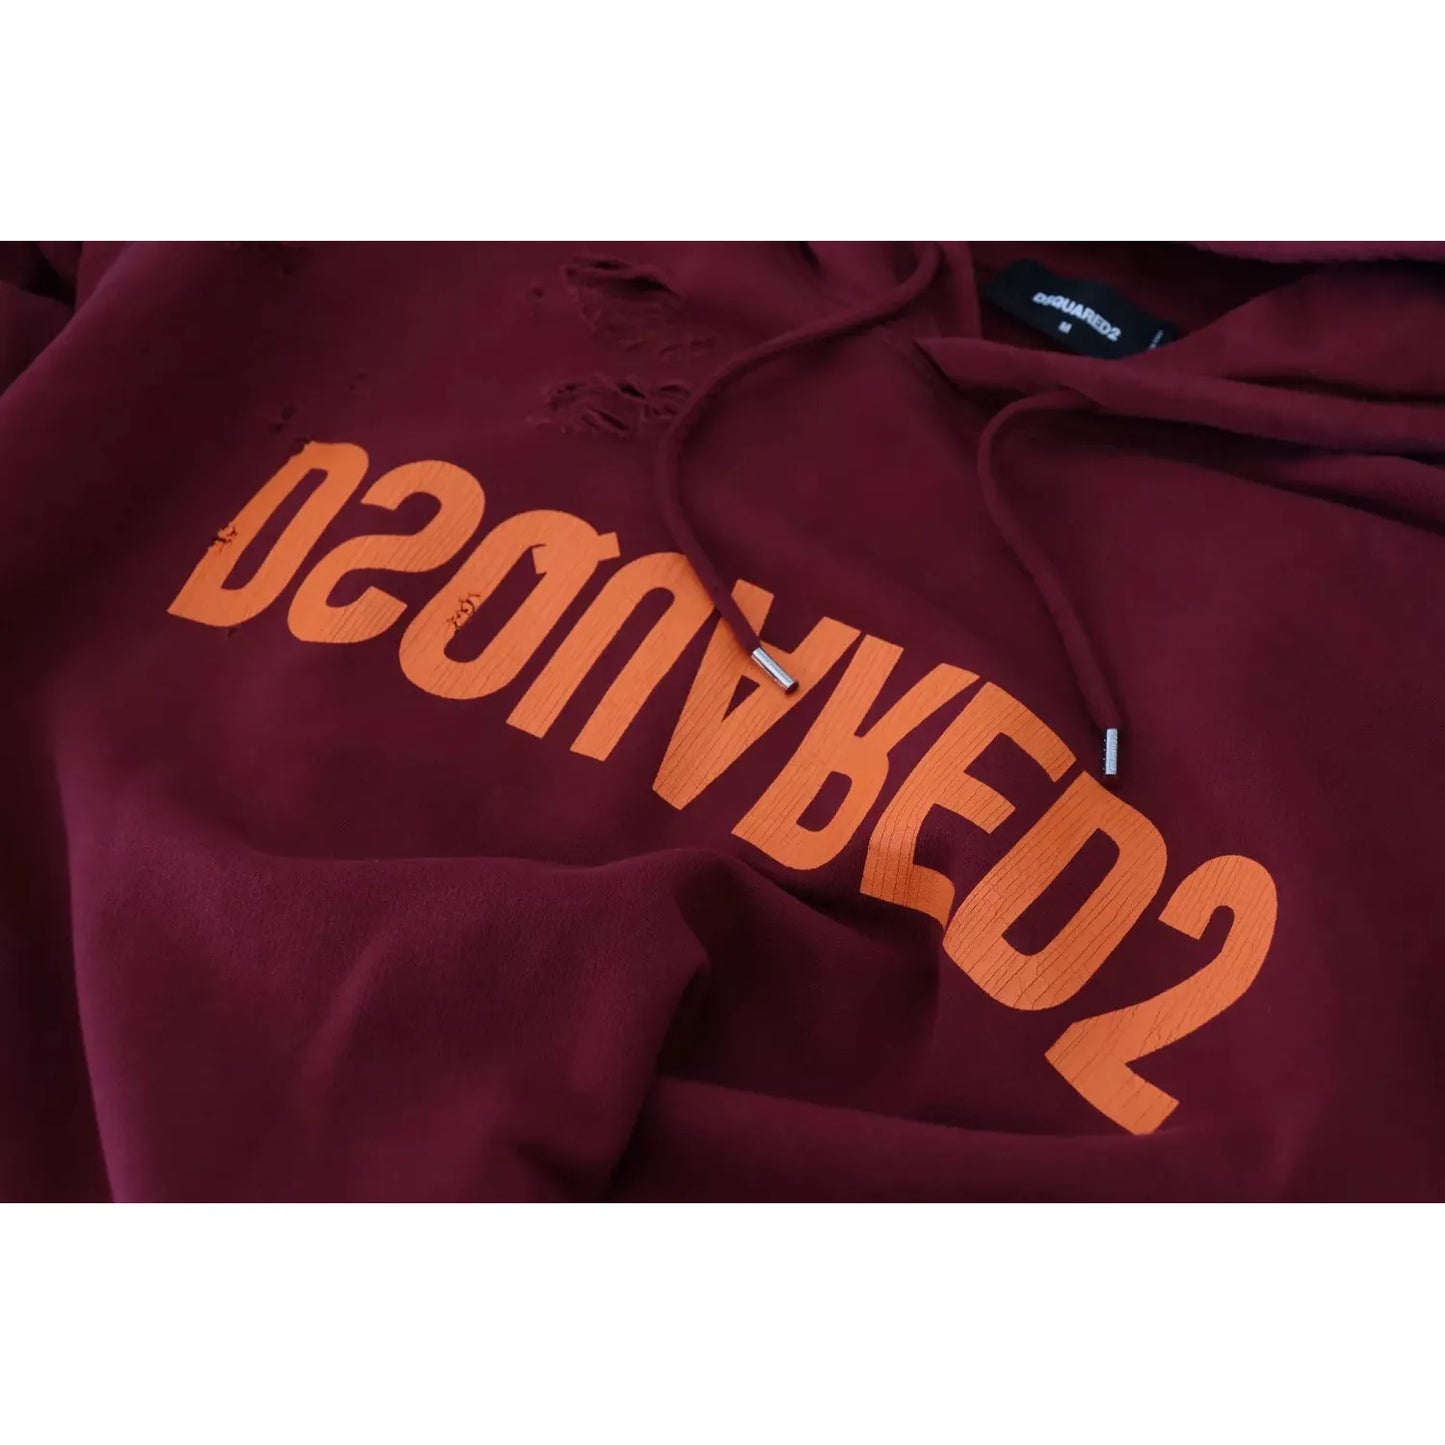 Dsquared² Maroon Cotton Tattered Hooded Printed Pullover Sweater maroon-cotton-tattered-hooded-printed-pullover-sweater